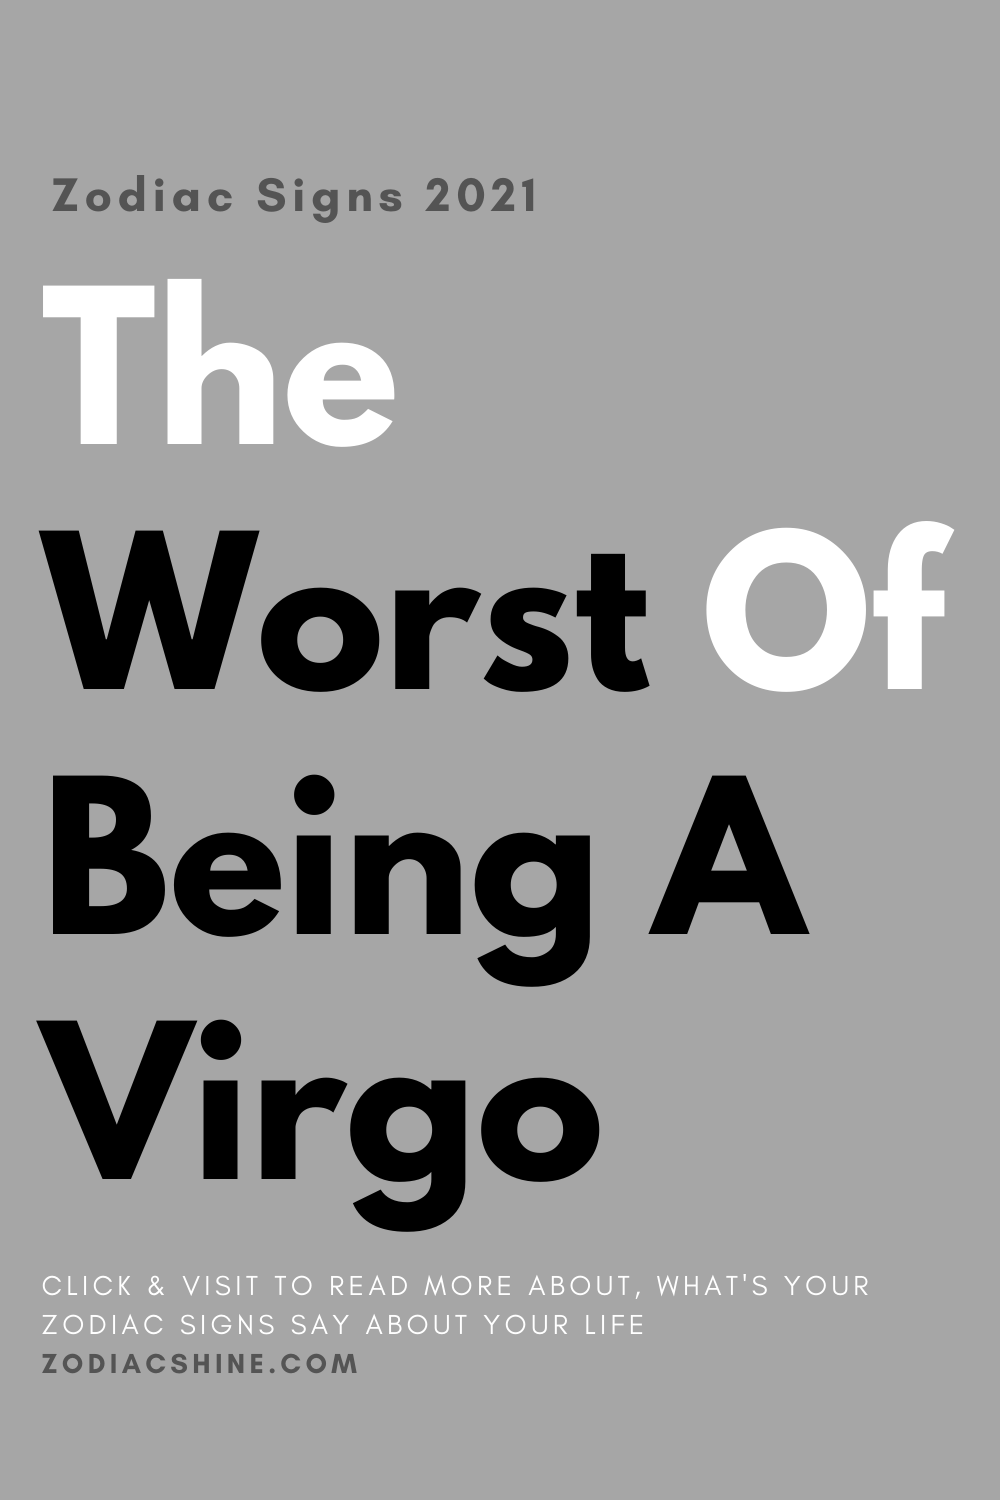 The Worst Of Being A Virgo